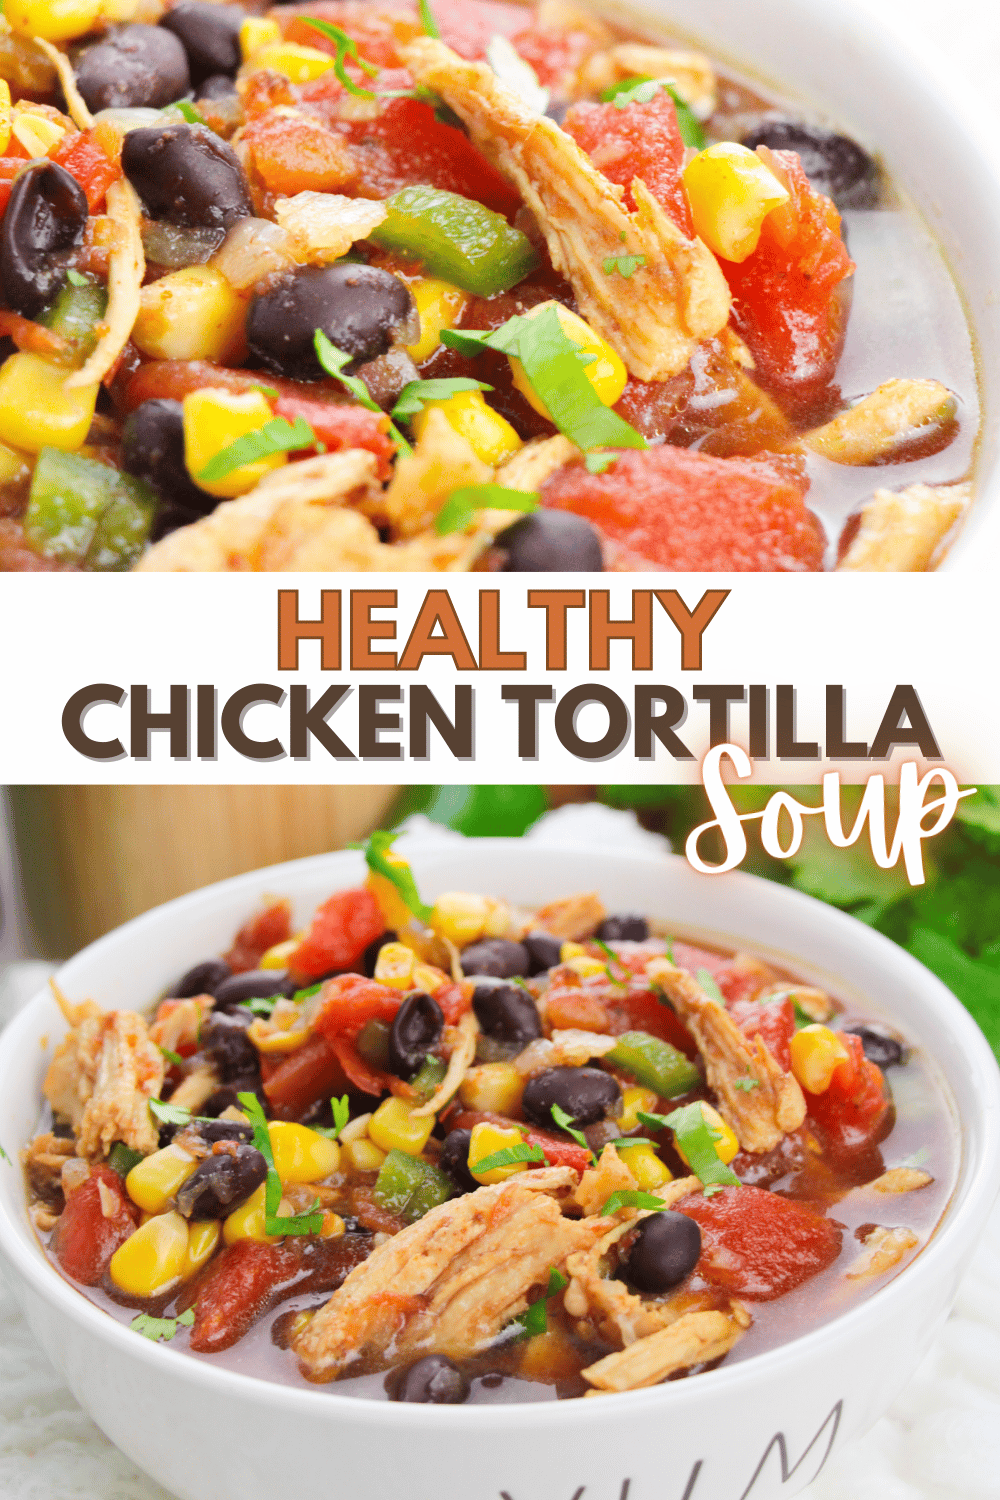 This delicious healthy chicken tortilla soup is bursting with flavor and is perfect for fall. Plus, it’s easy to make, and budget-friendly! #healthychickentortillasoup #chickentortillasoup #chicken #tortillasoup #soup via @wondermomwannab